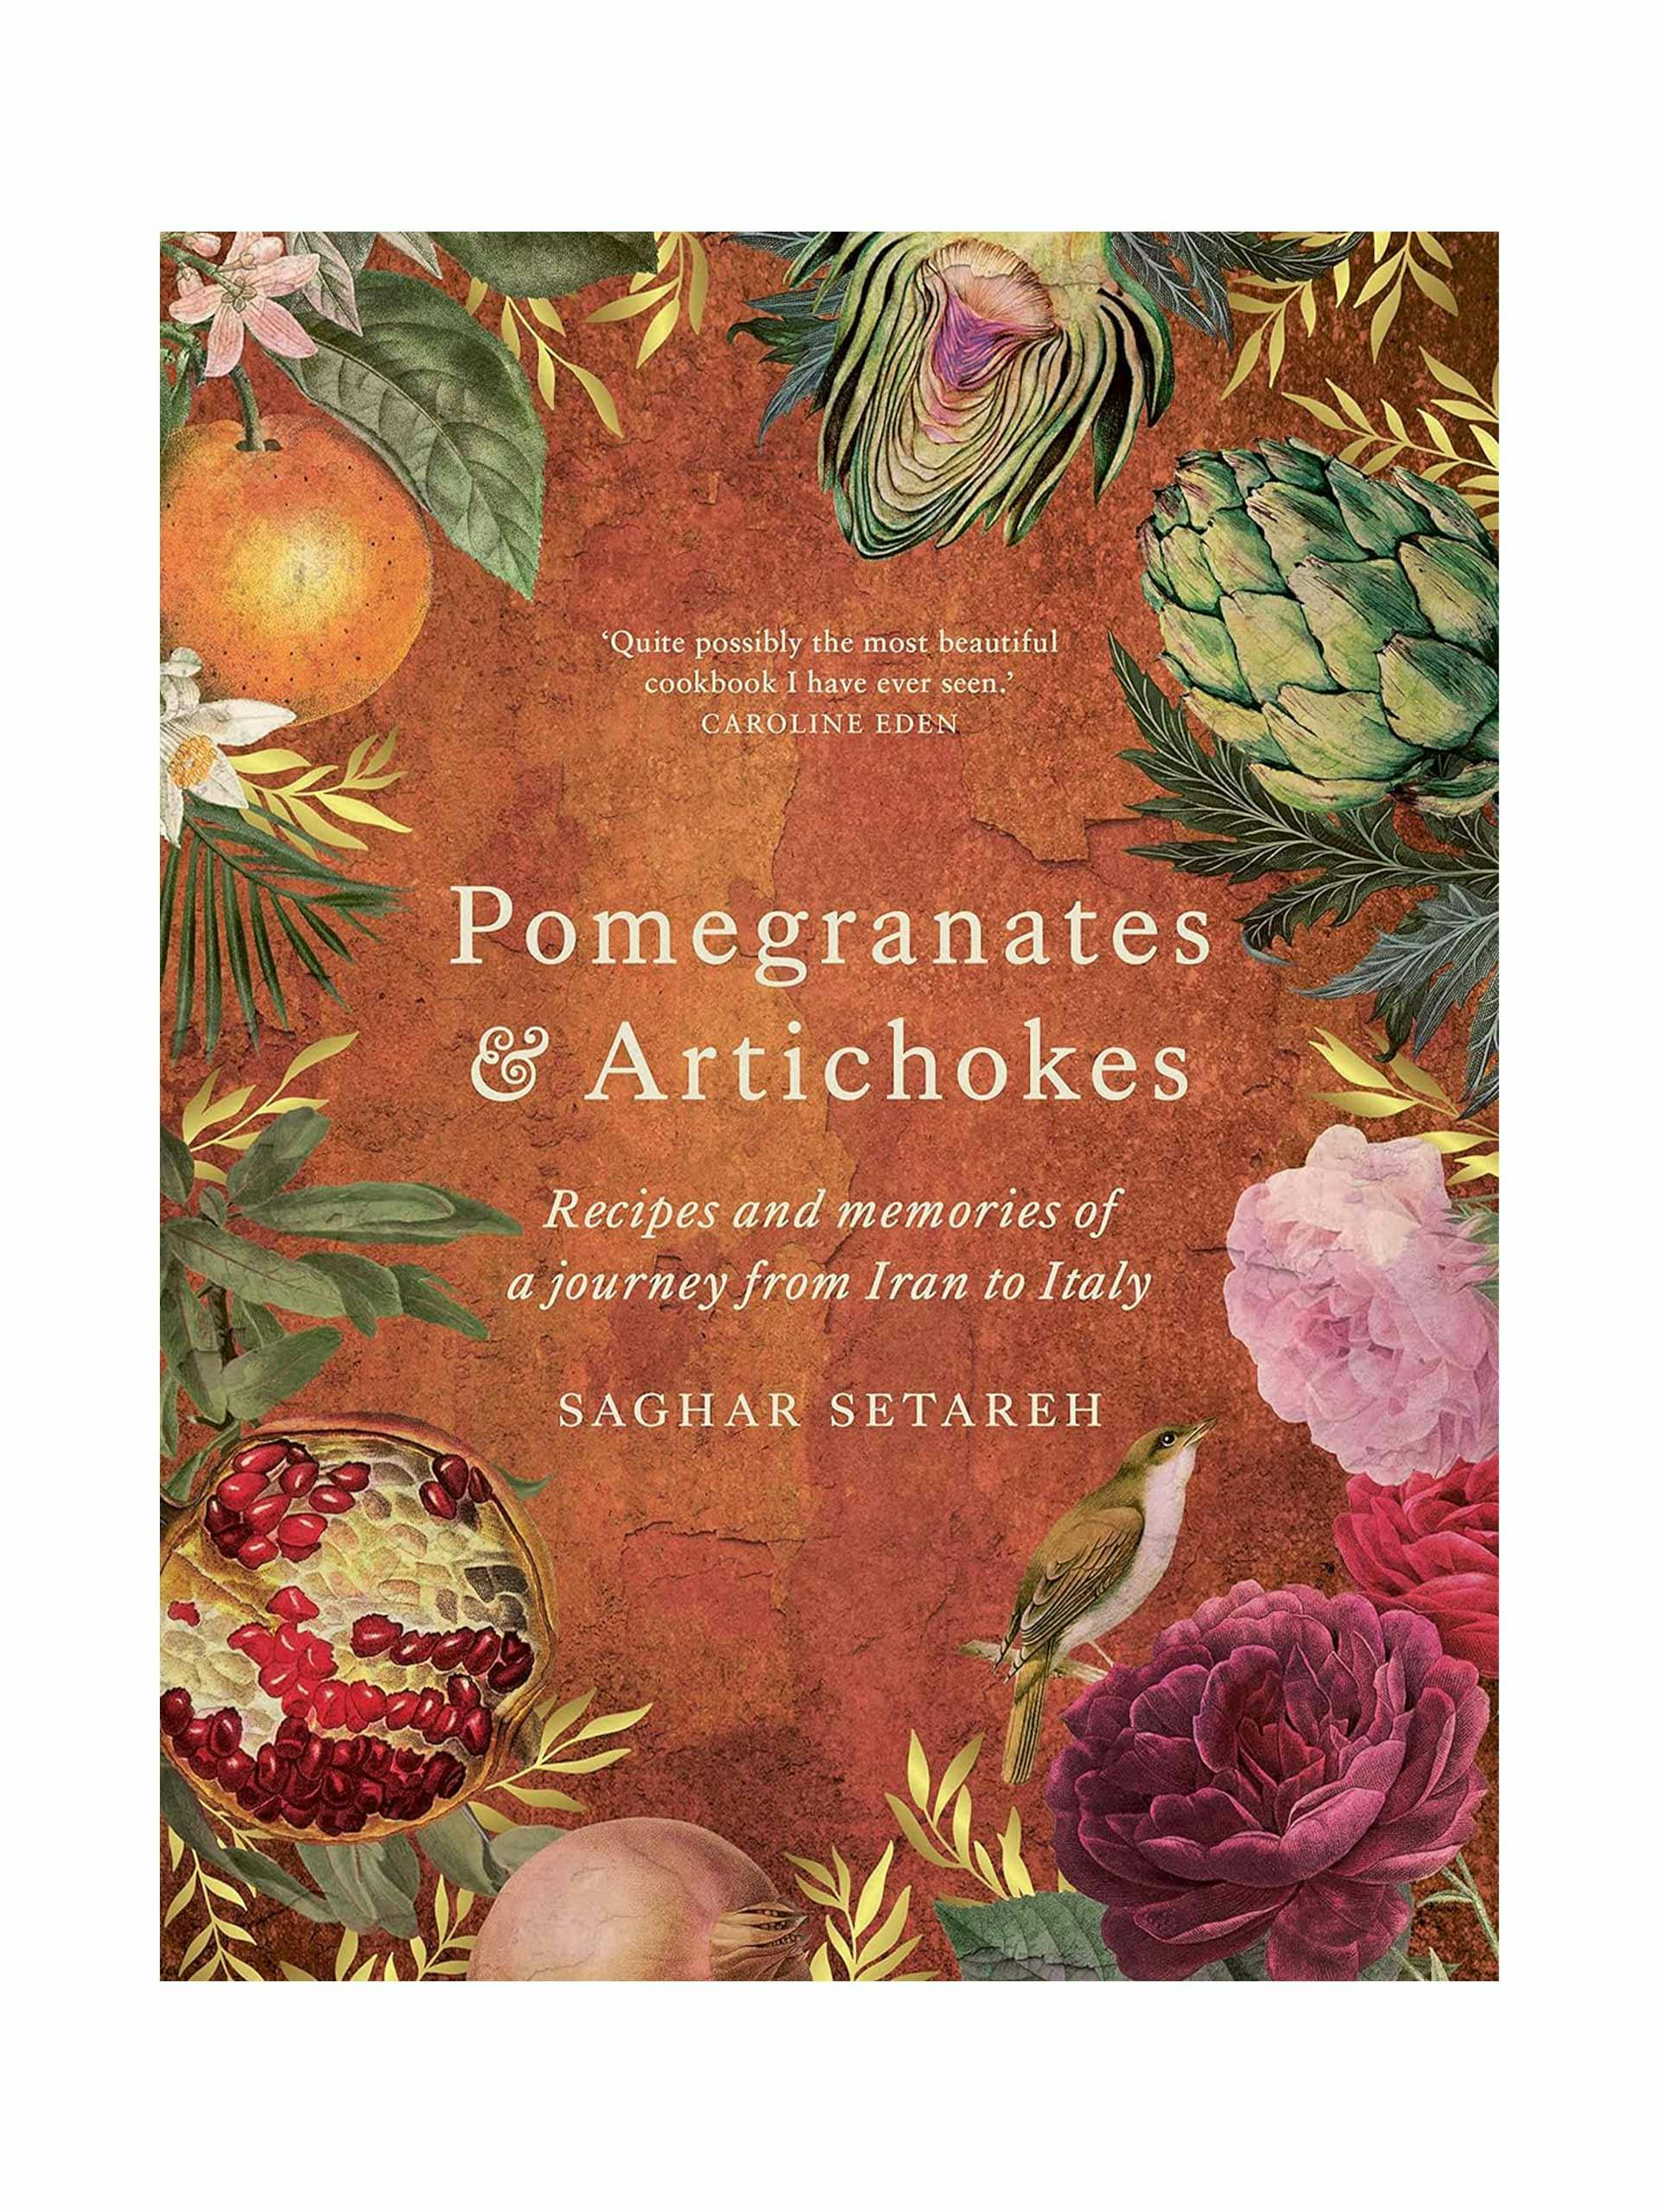 Pomegranates & Artichokes: recipes and memories of a journey from Iran to Italy